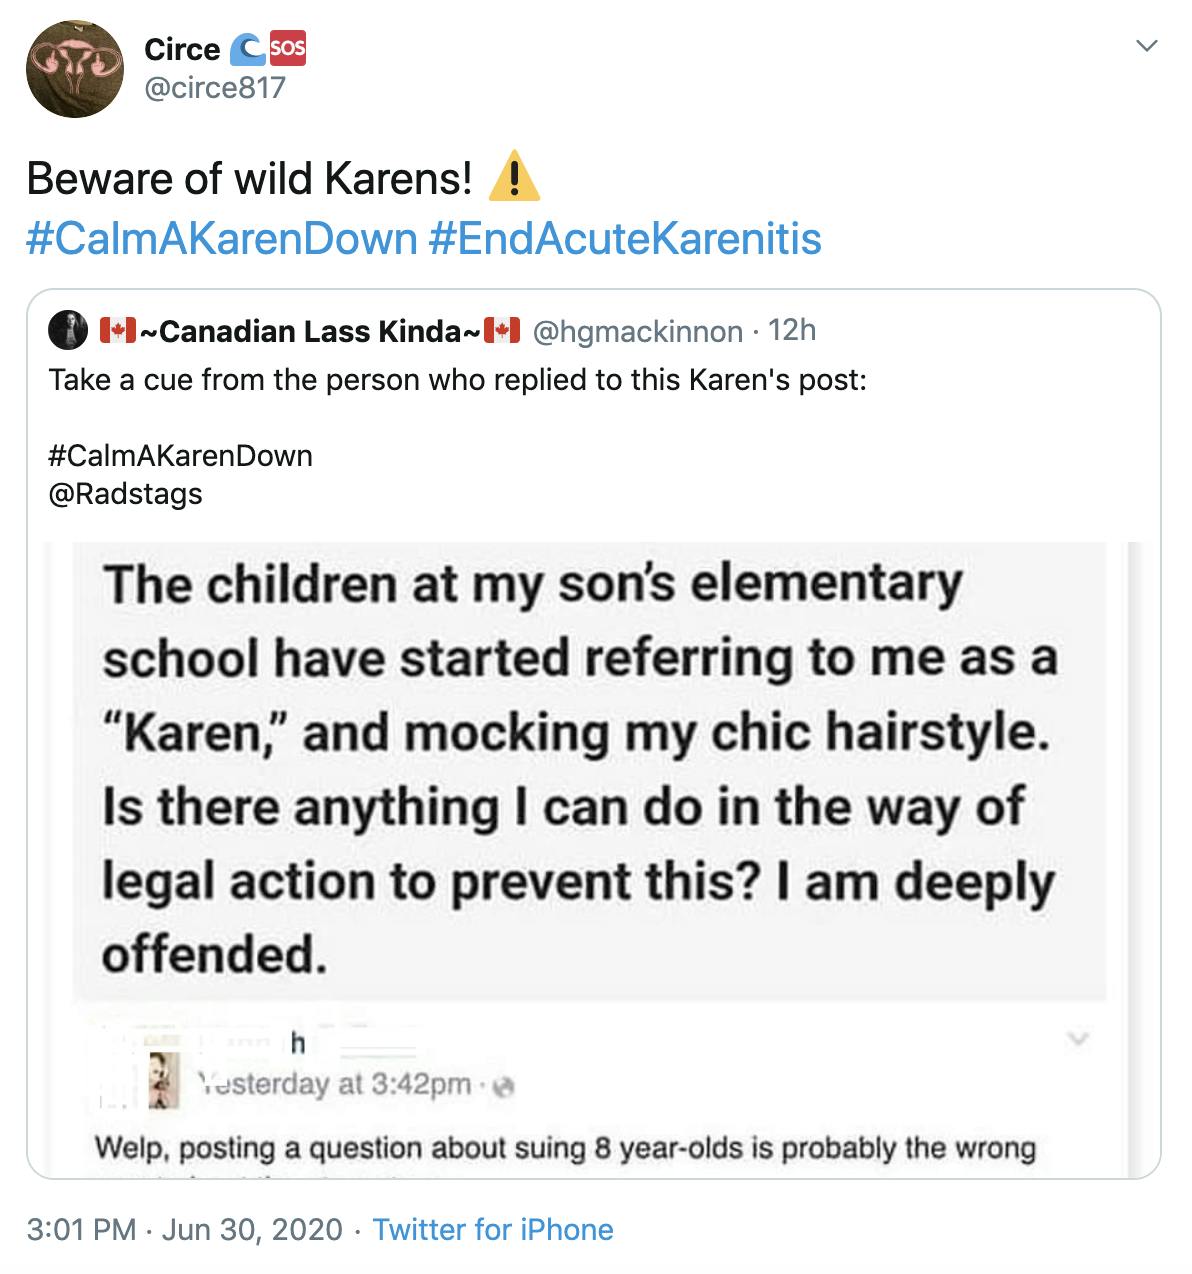 "Beware of wild Karens! Warning sign" over screenshot of post where woman asks how she can stop local school children calling her Karen and mocking her 'chic' hair